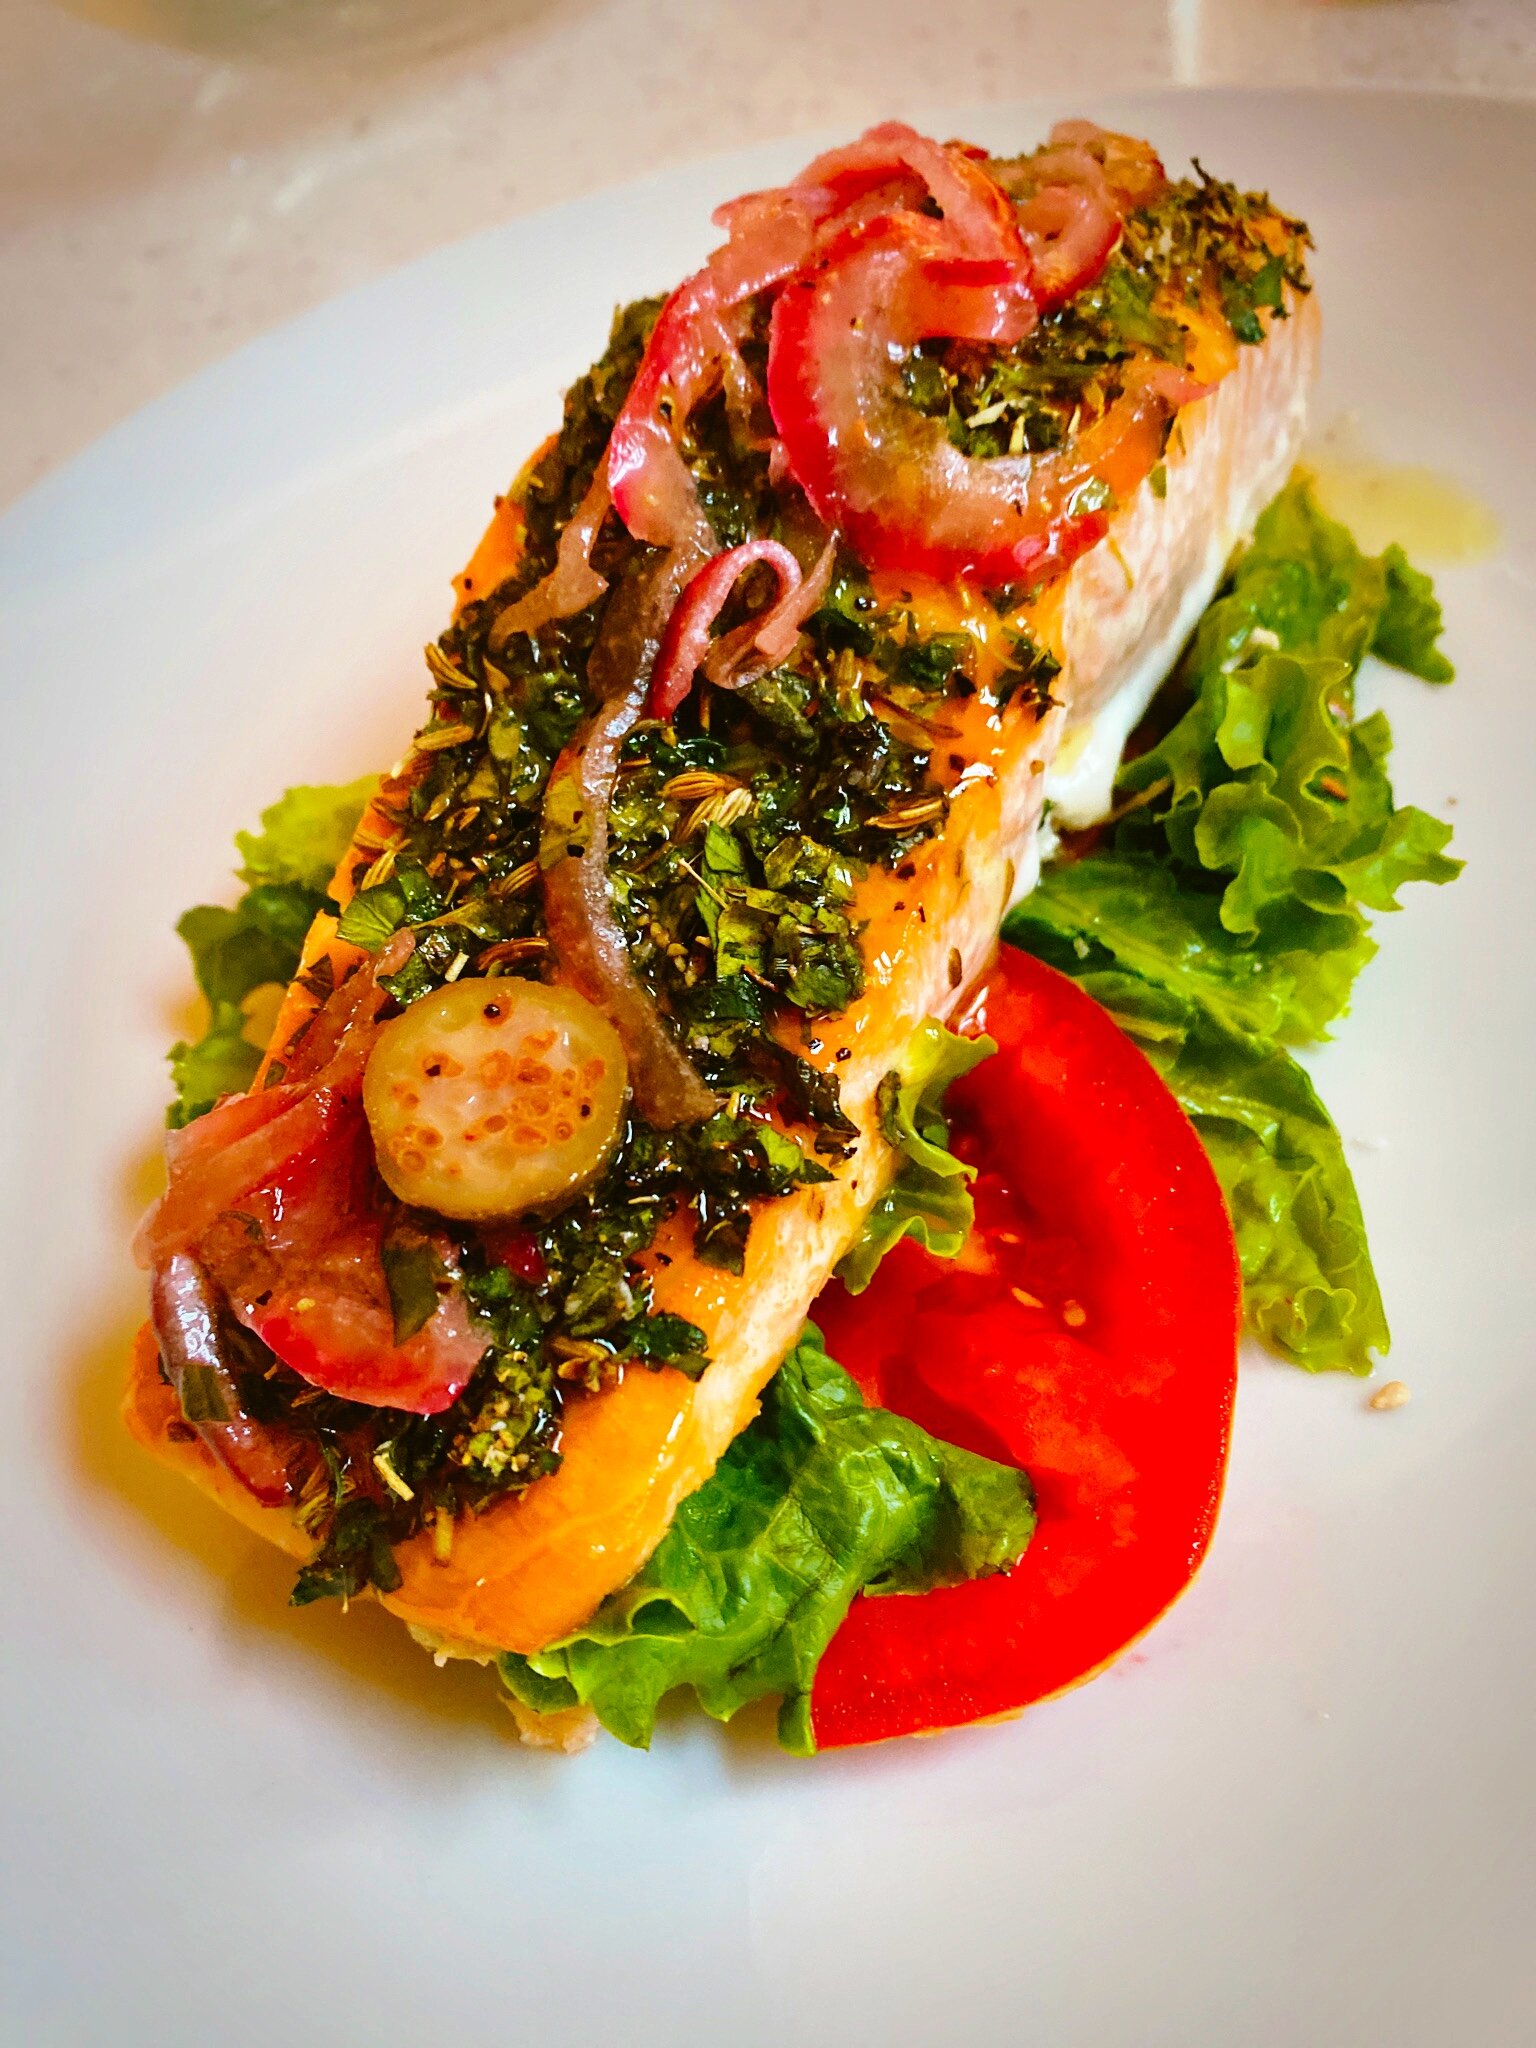 Baked Herbed Salmon with Red Onion Caper Vinaigrette